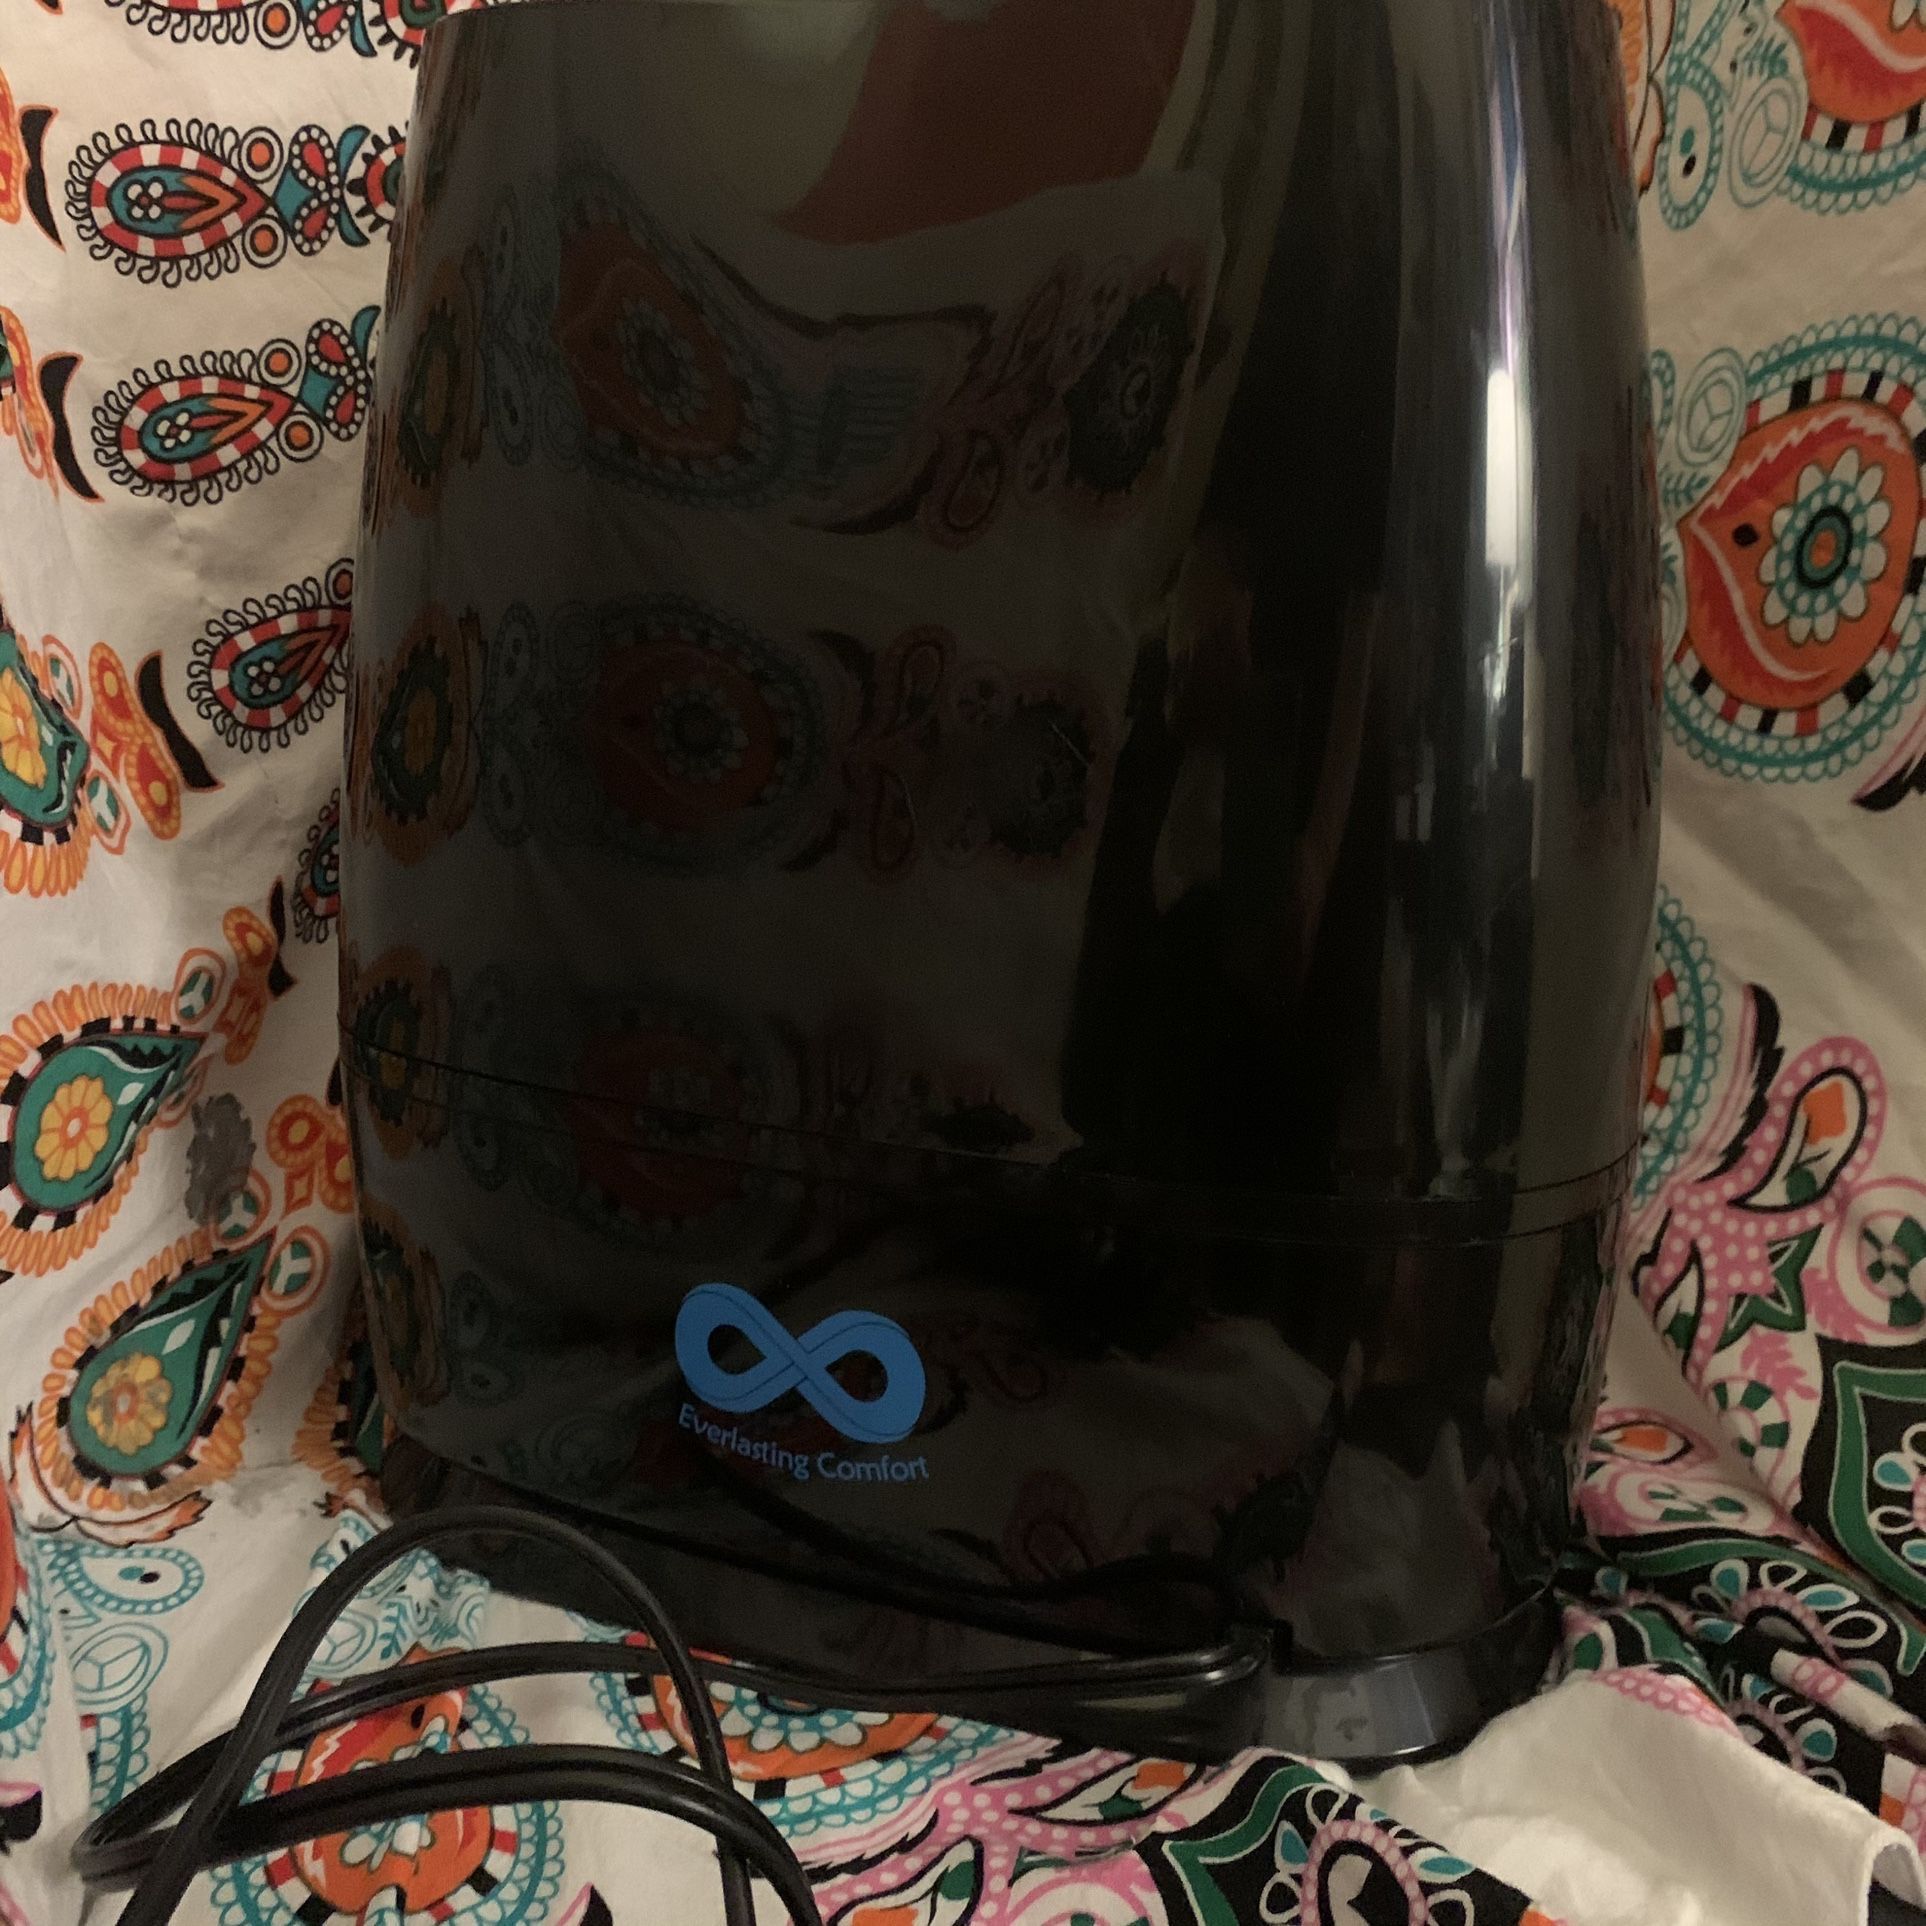 Everlasting Comfort Humidifier with Essential Oil Tray